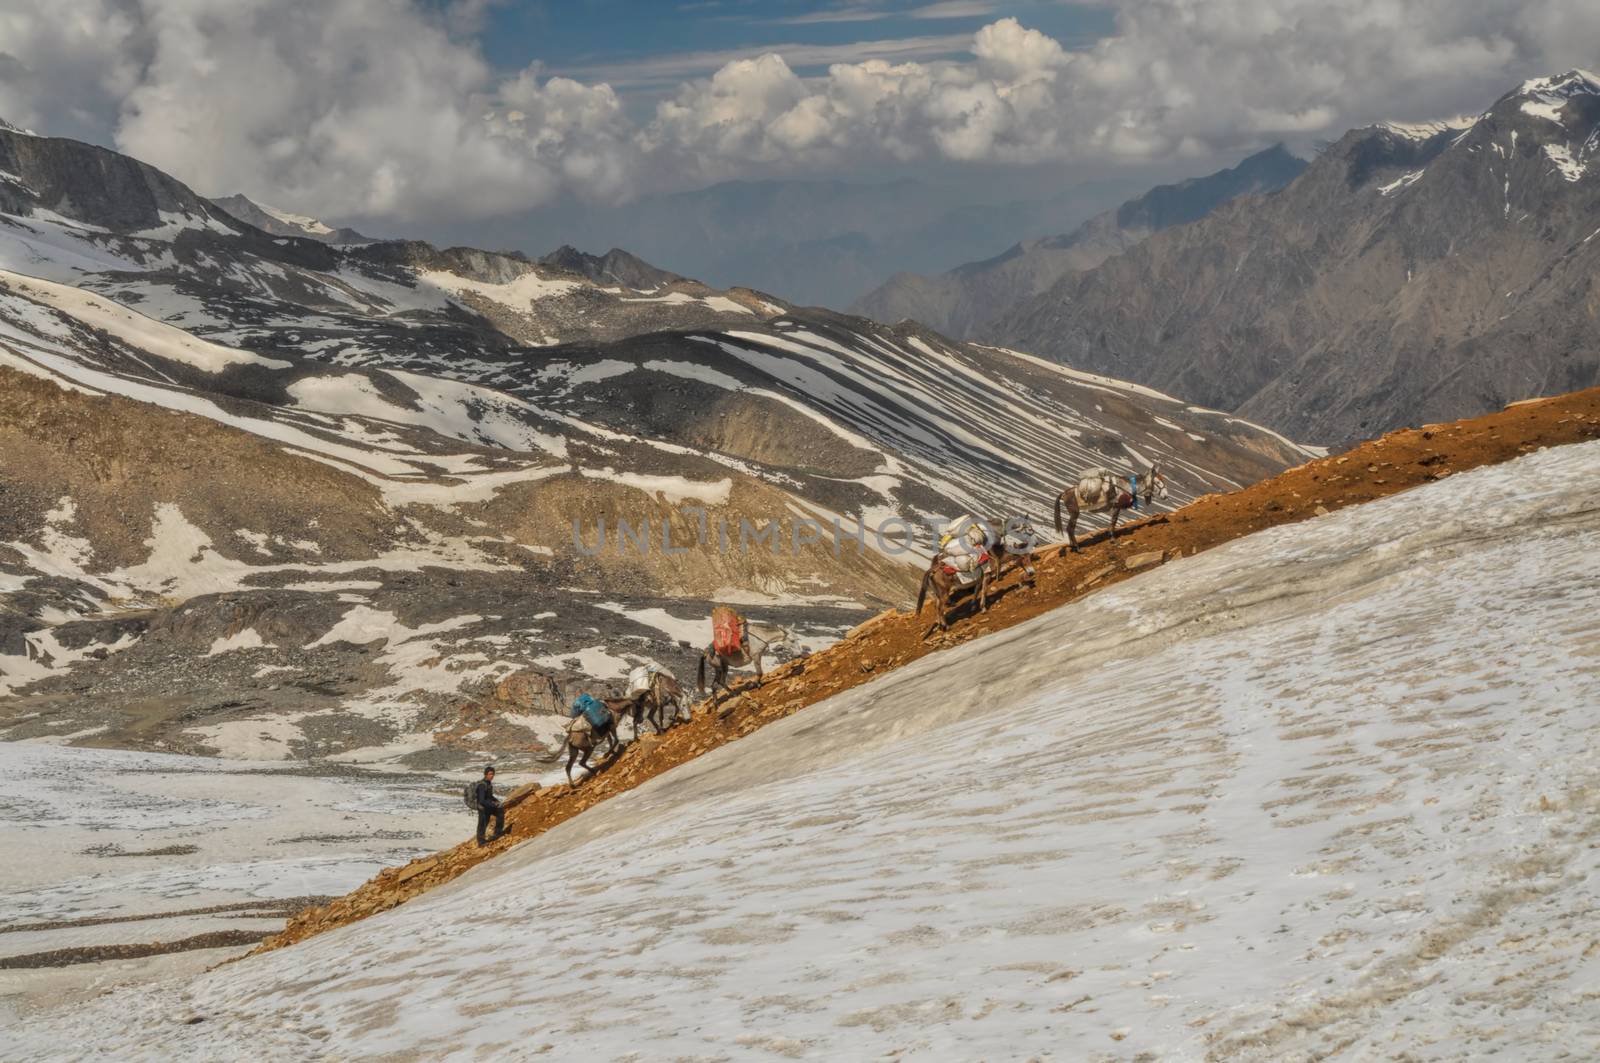 Mules in Himalayas by MichalKnitl